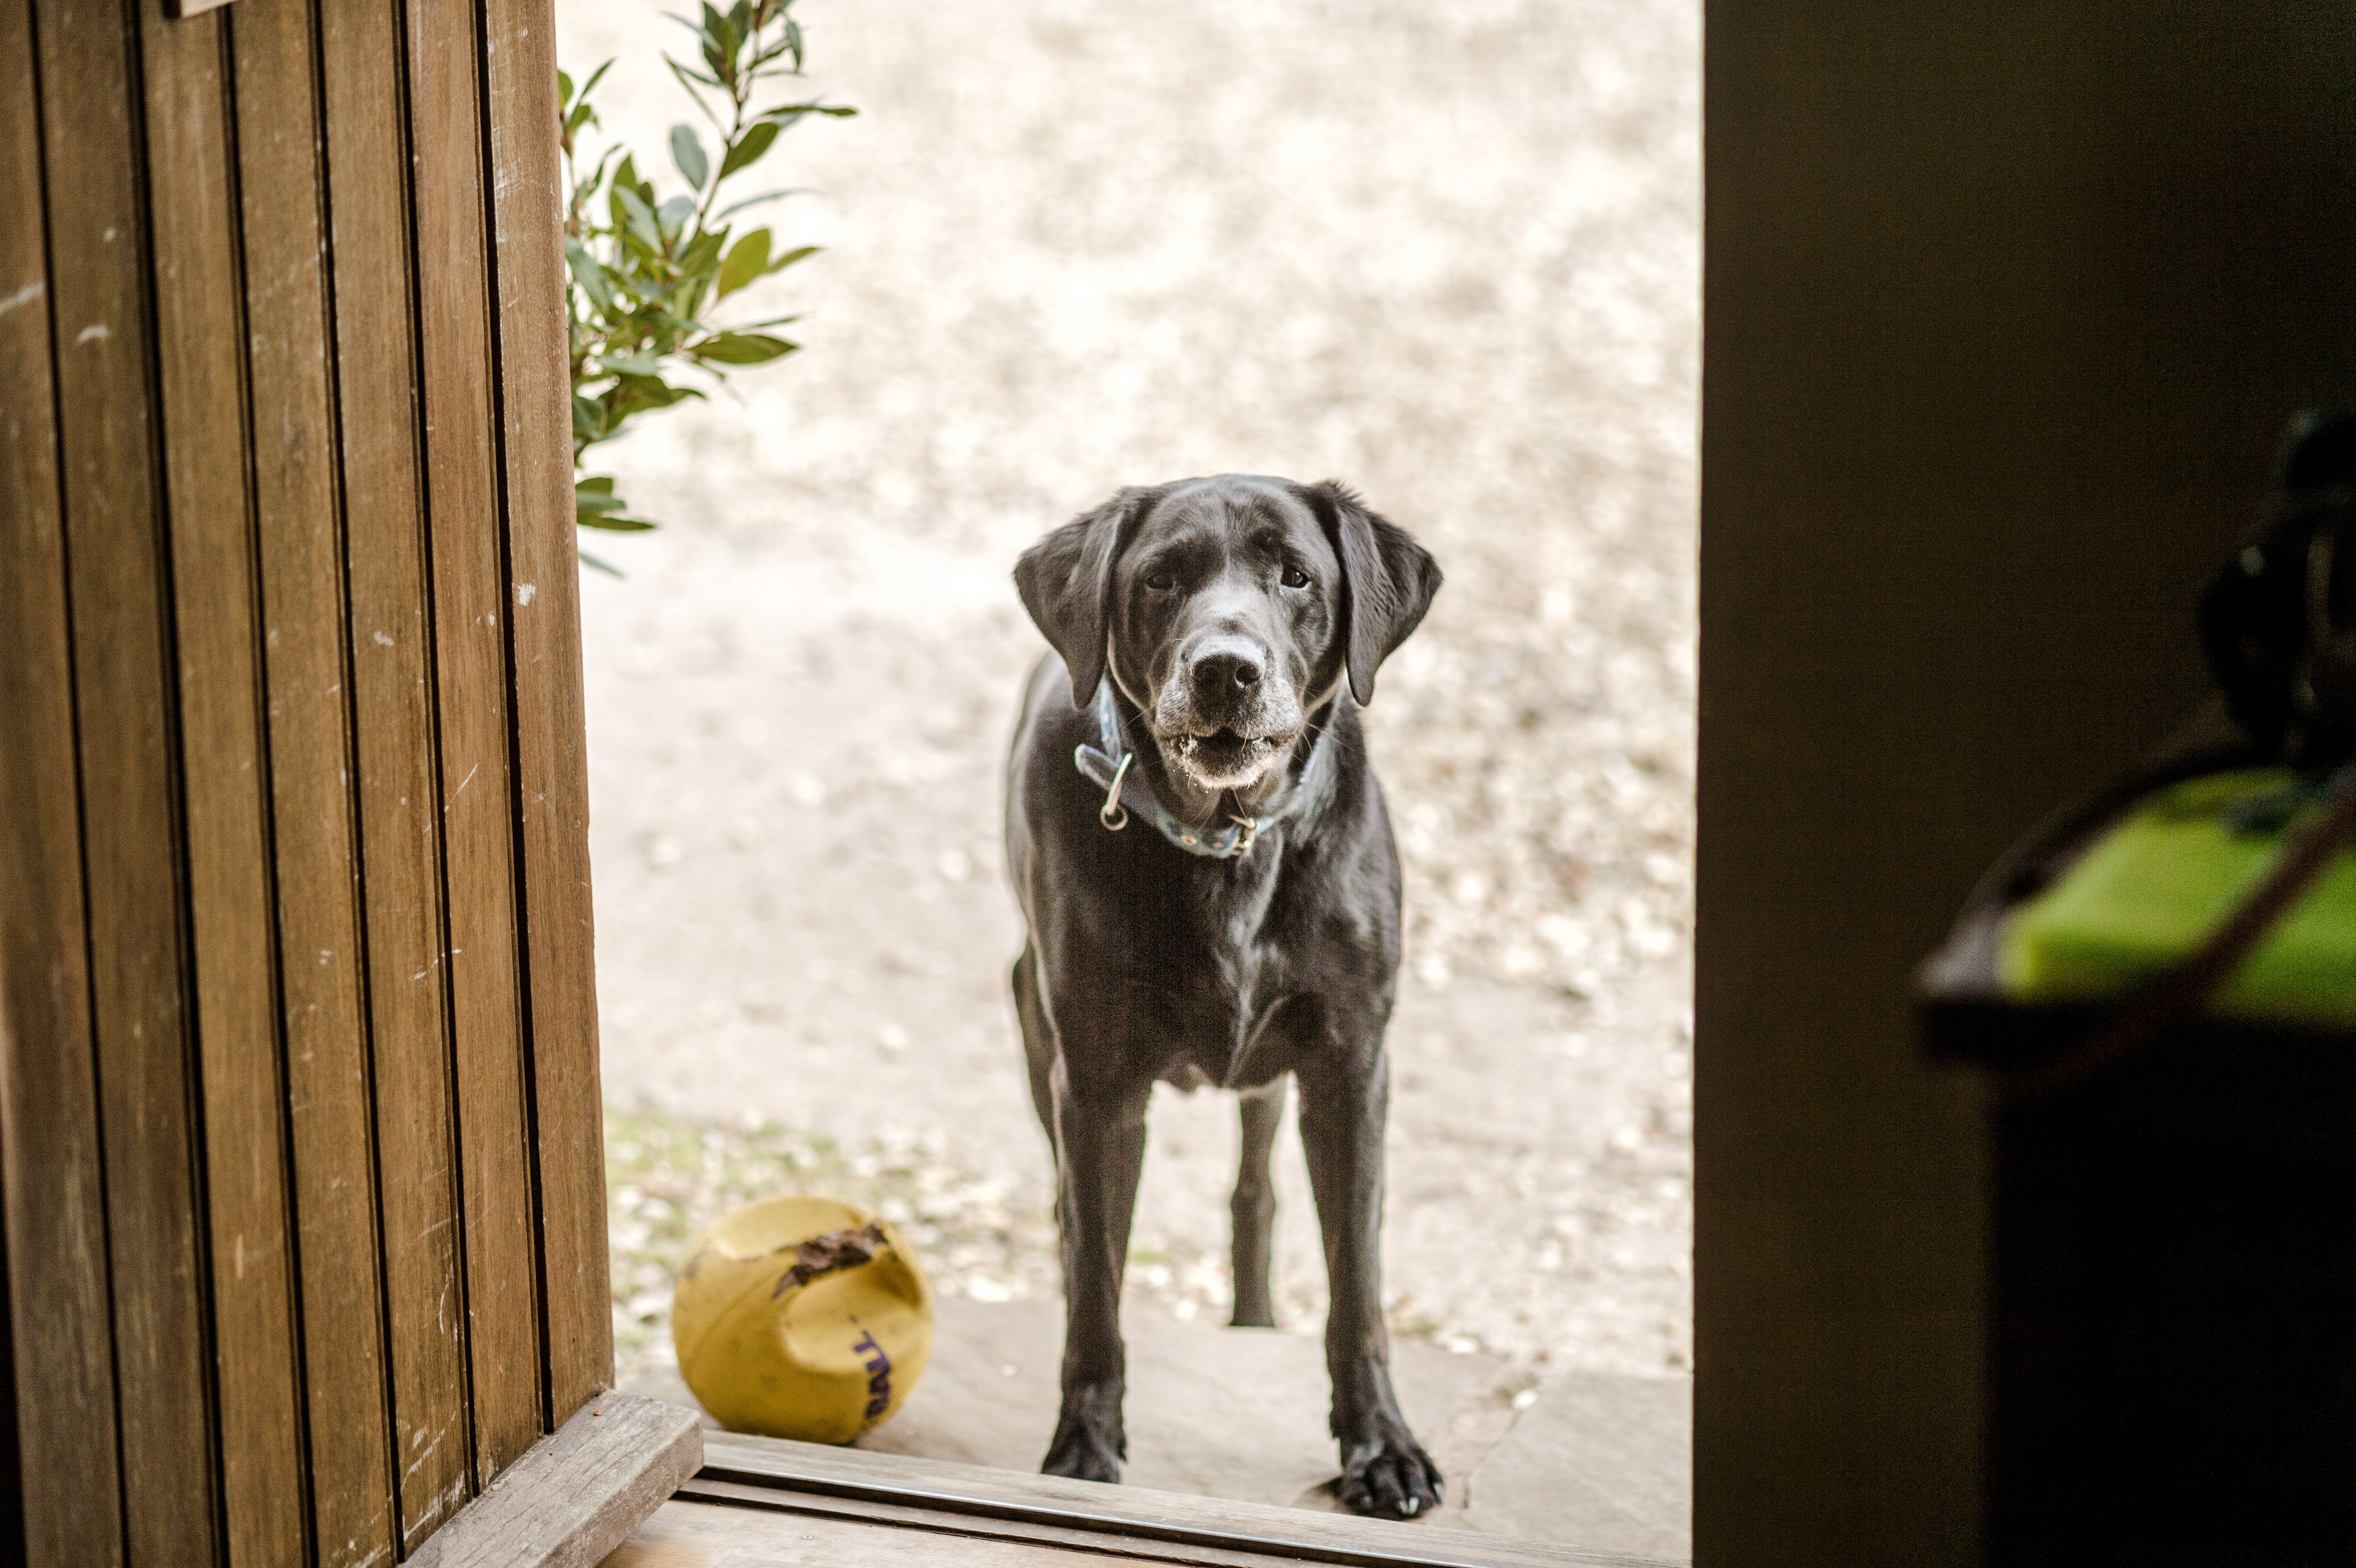 Black Labrador stood at back door of house, looking to camera